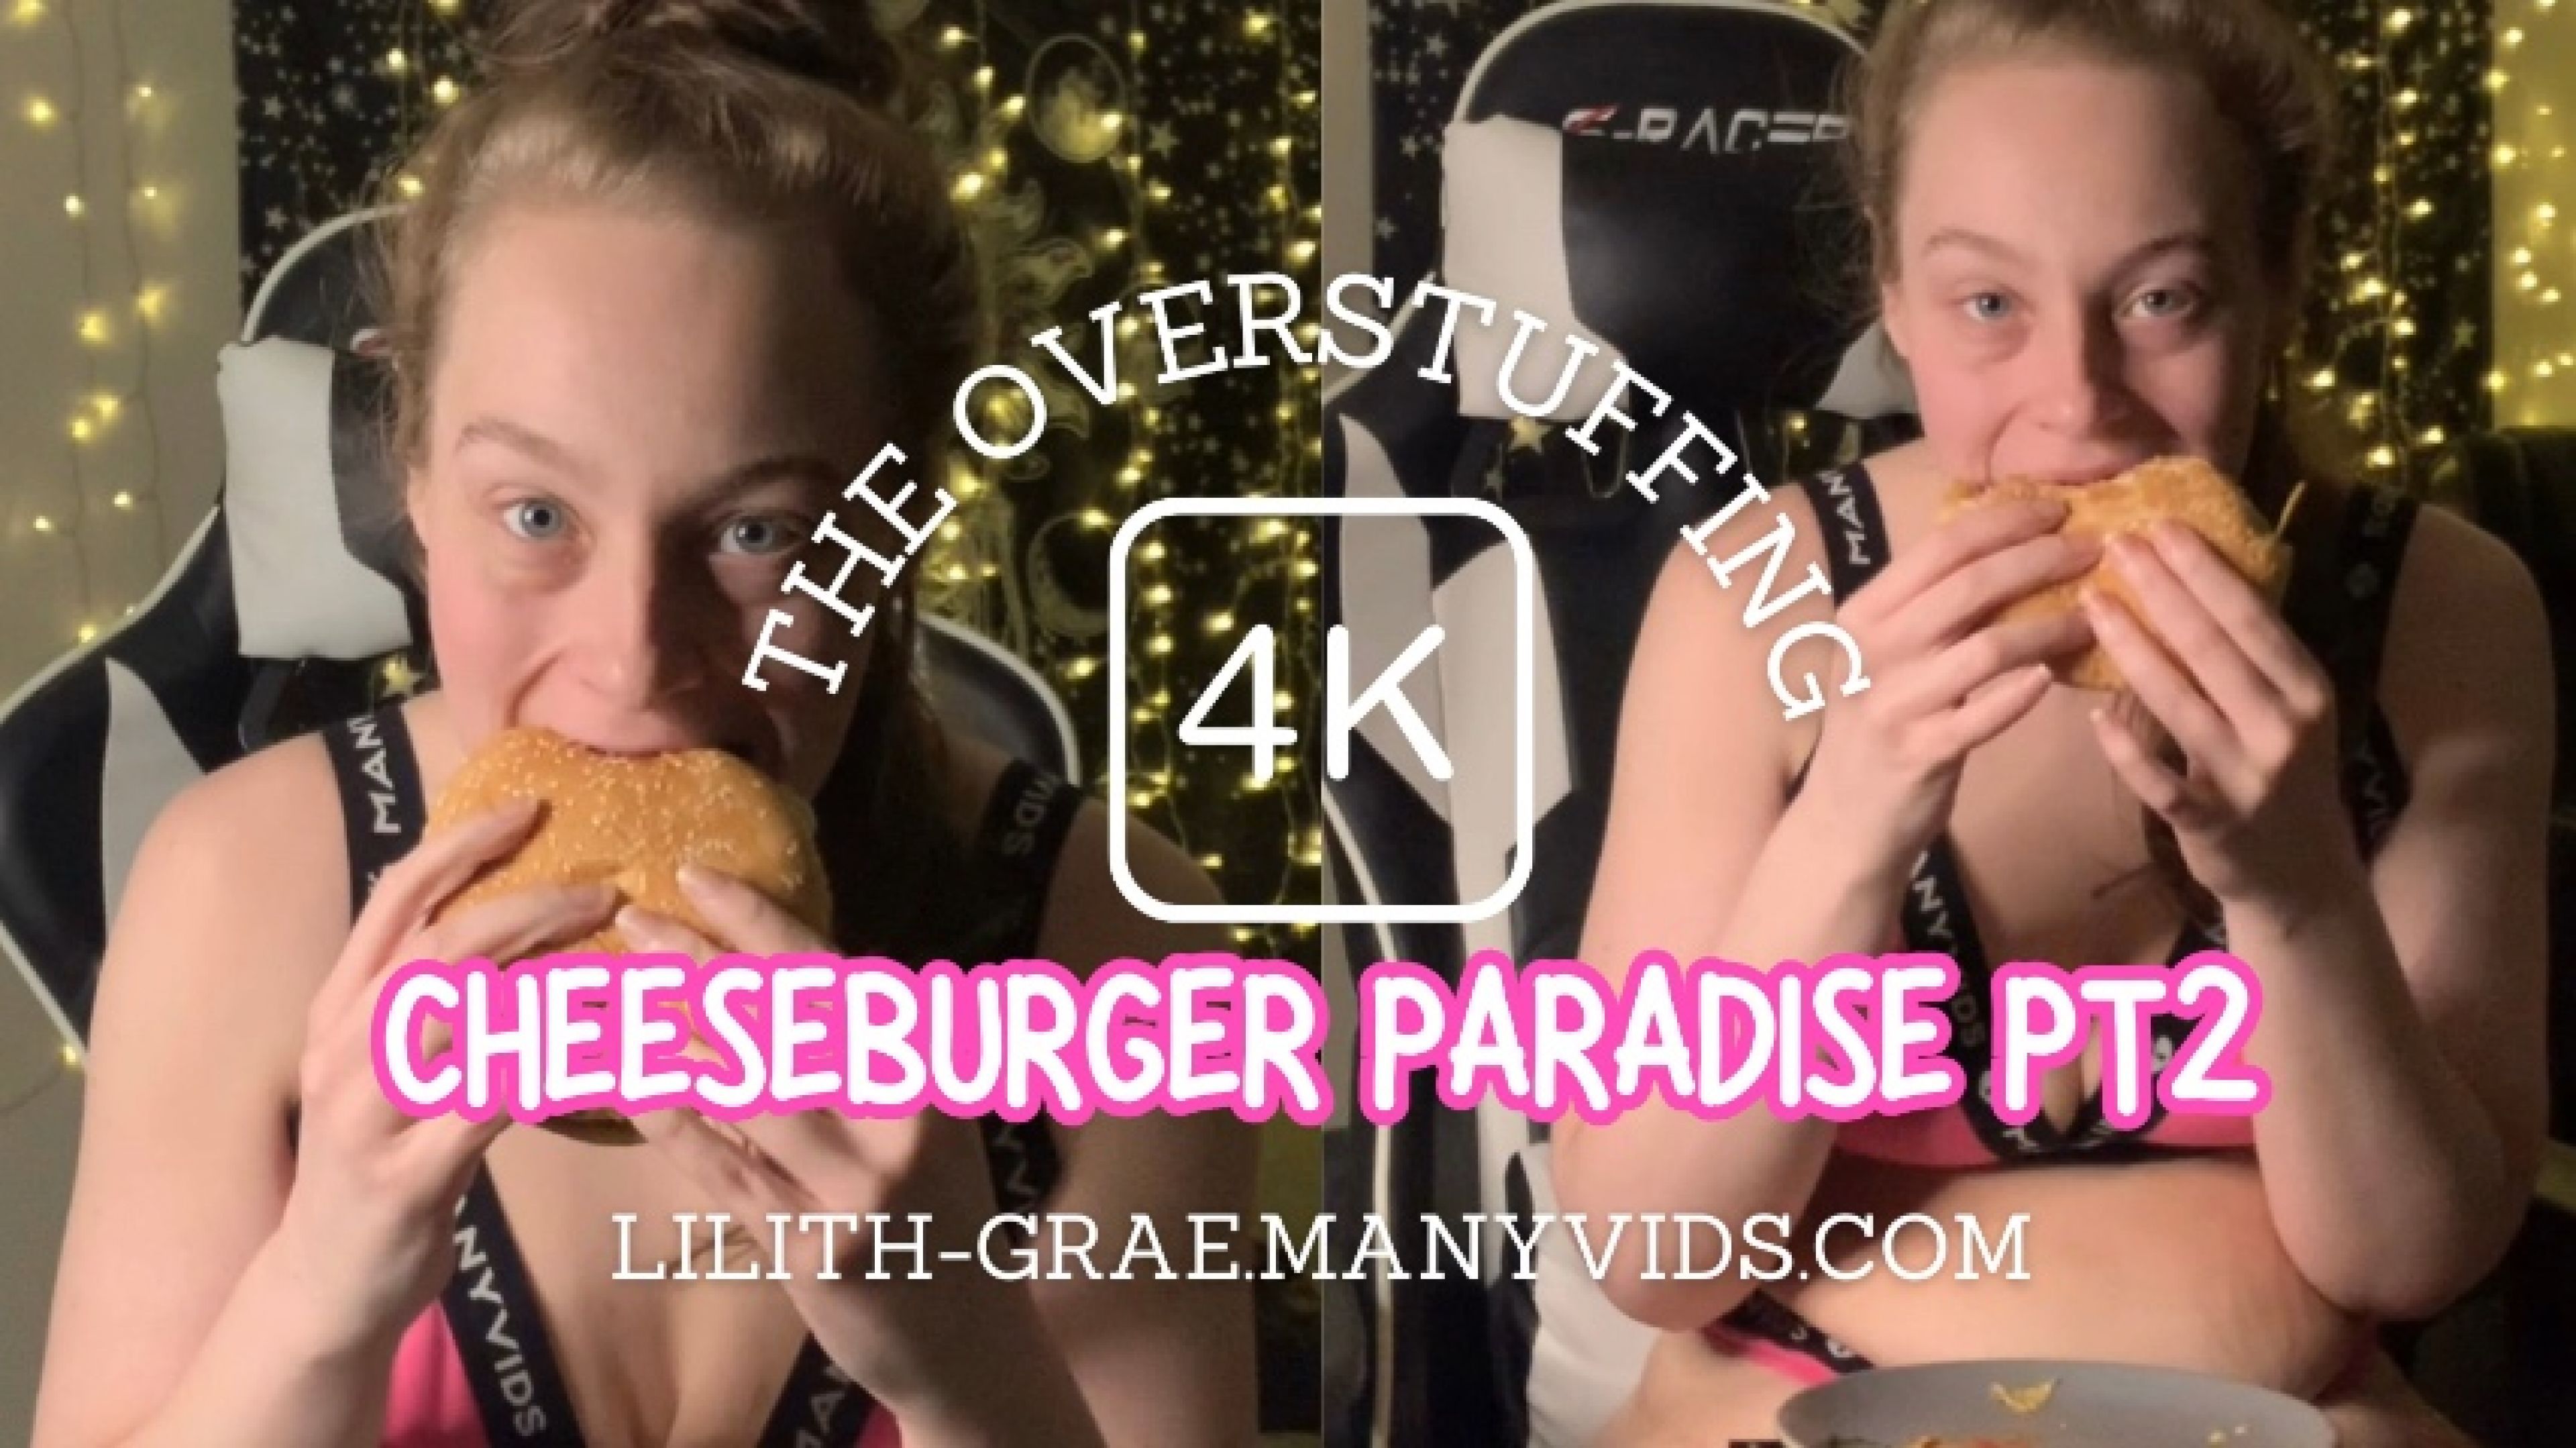 Cheeseburger Paradise Pt2 - The Overstuffing in 4K